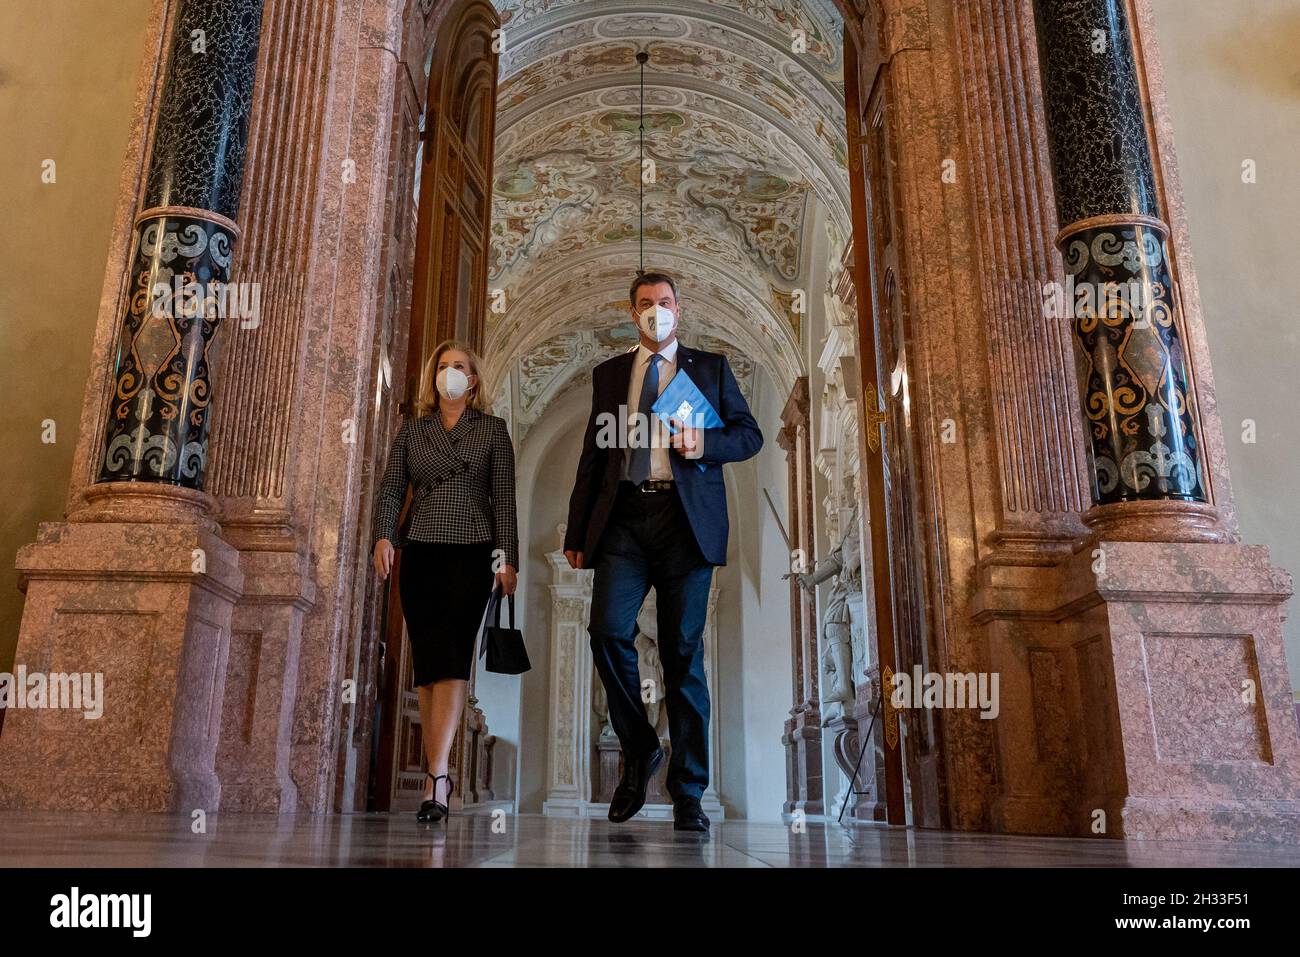 Munich, Germany. 25th Oct, 2021. Christine Wormuth (l), U.S. Secretary of the Army, and Markus Söder (CSU), Minister President of Bavaria, walk through the Residenz into the Kaisersaal before the start of the Bavarian Minister President's flag ribbon ceremony for U.S. Army Europe stationed in Bavaria. The event is being held at the Residenz to commemorate the 75th anniversary of the liberation of the Dachau concentration camp by the US Army's 7th Army. Credit: Peter Kneffel/dpa/Alamy Live News Stock Photo